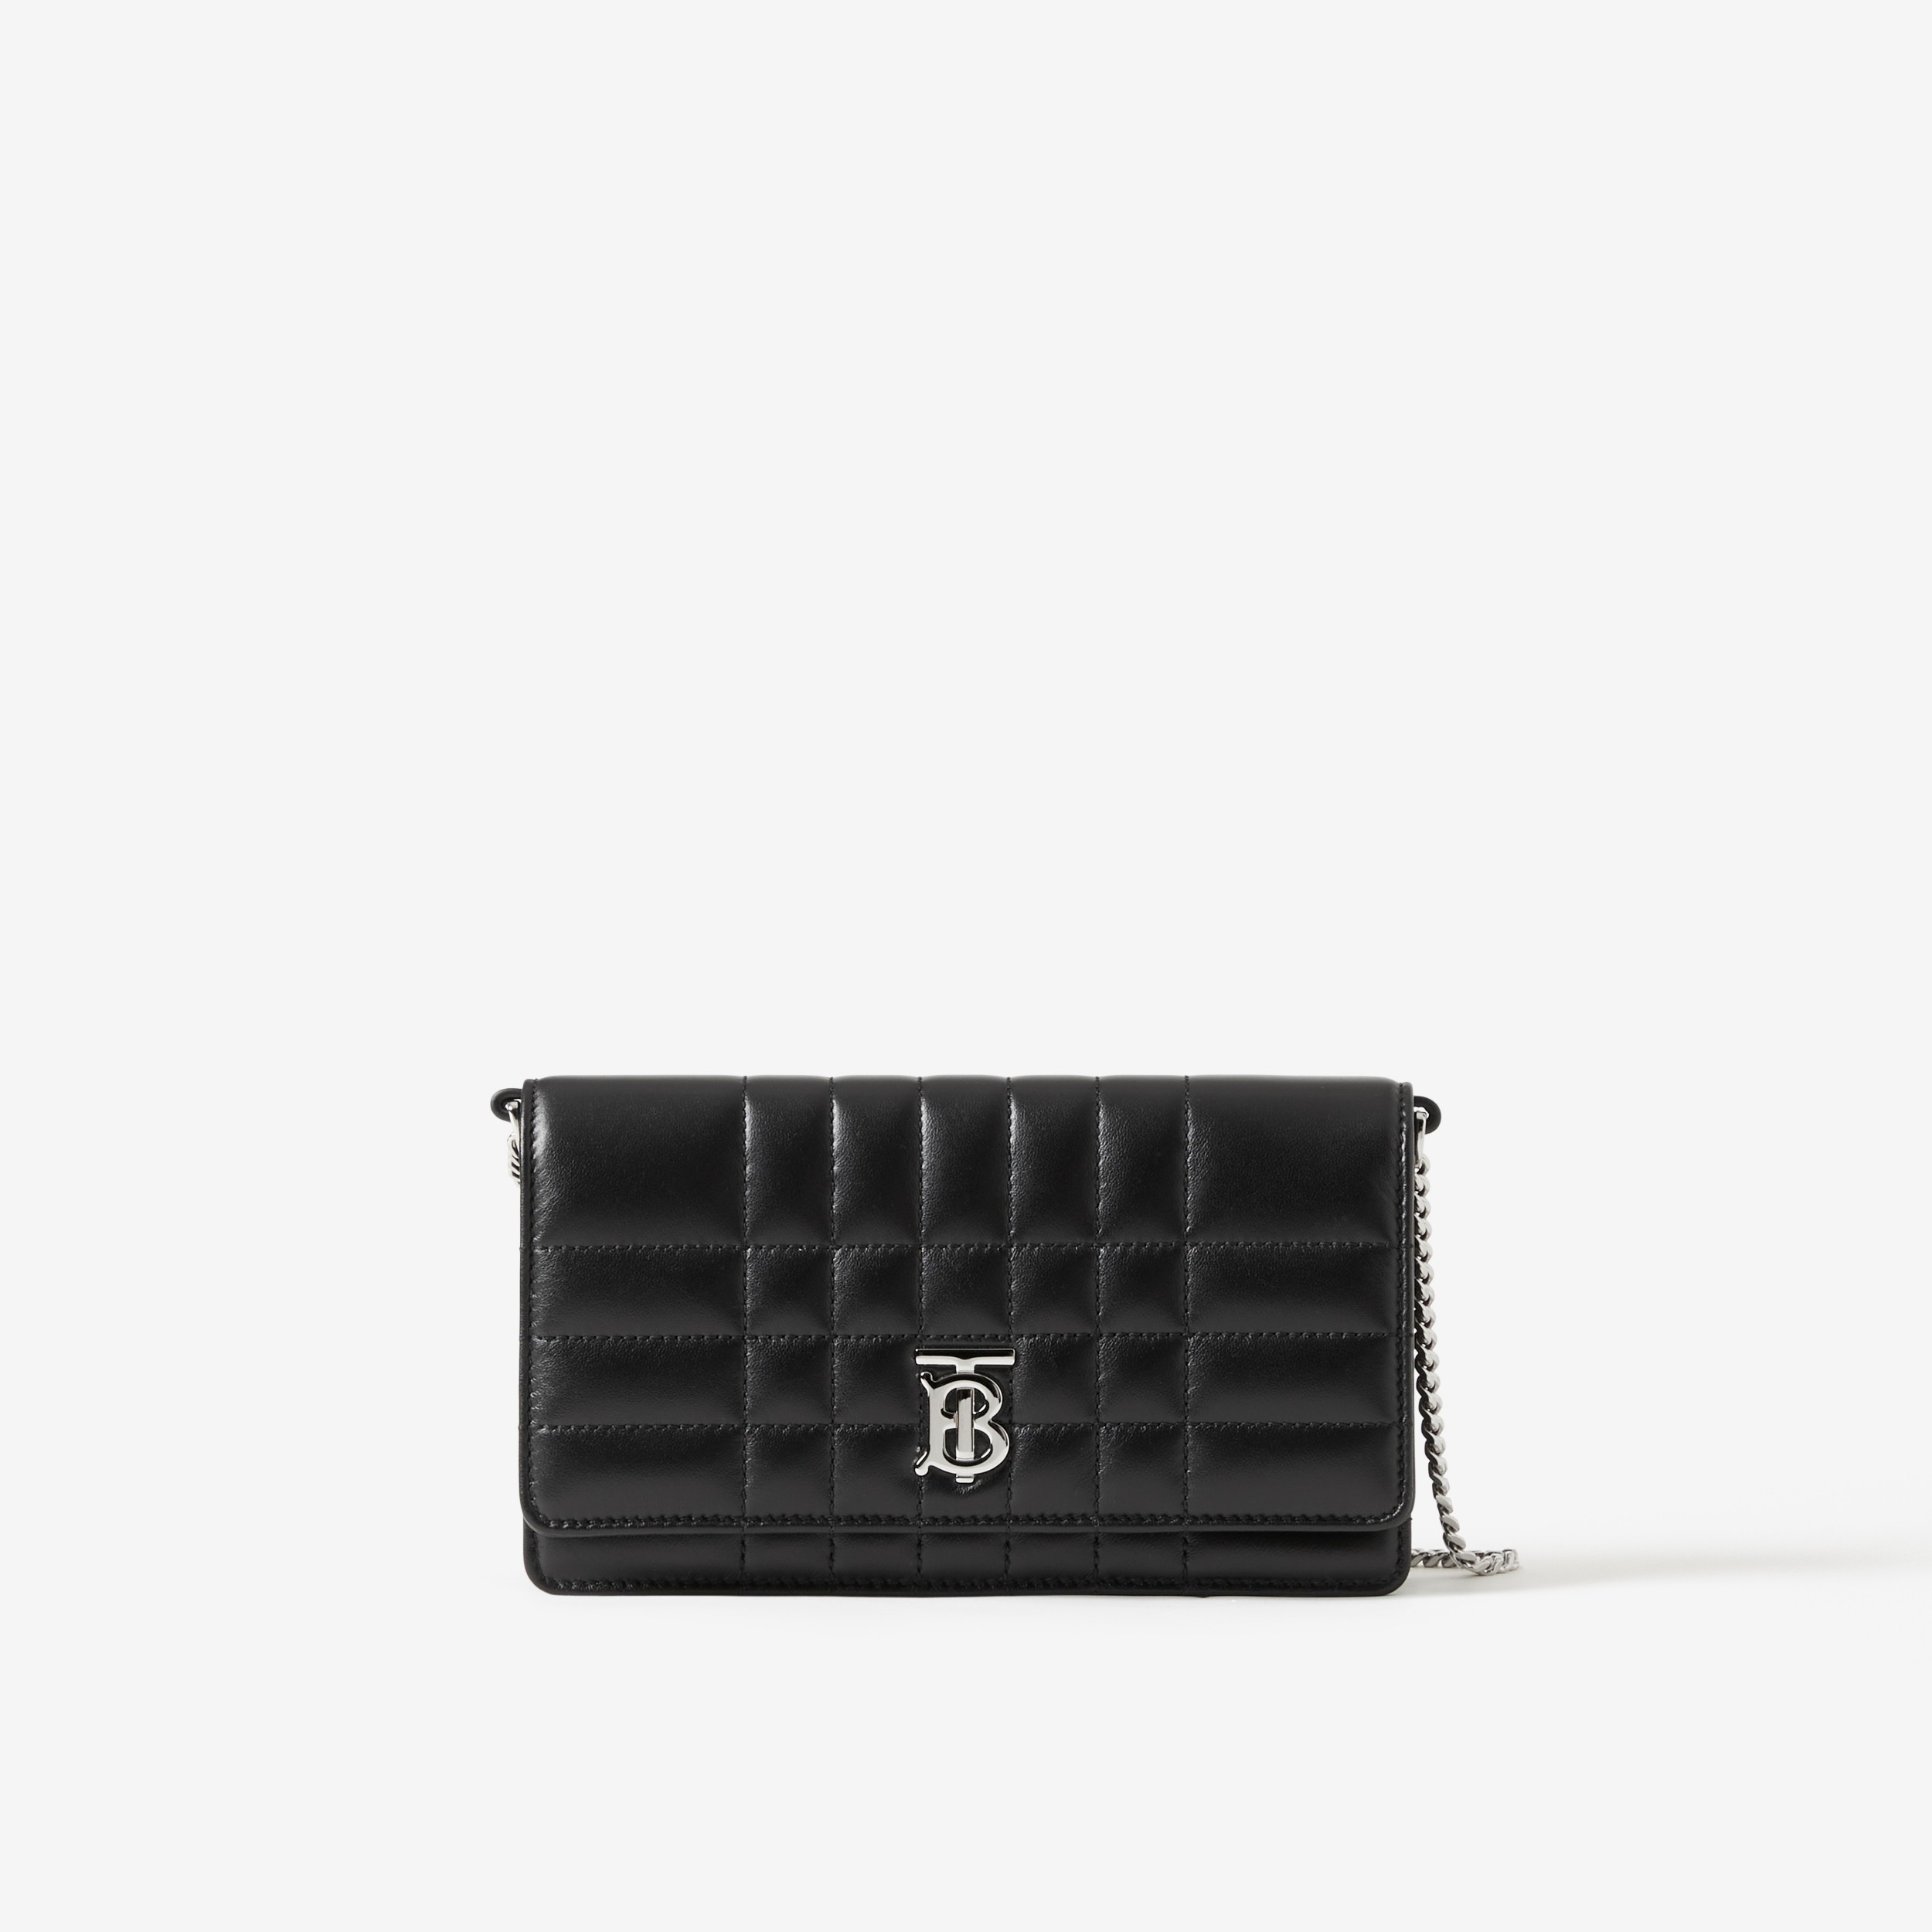 Burberry wallet, fake? - The  Community